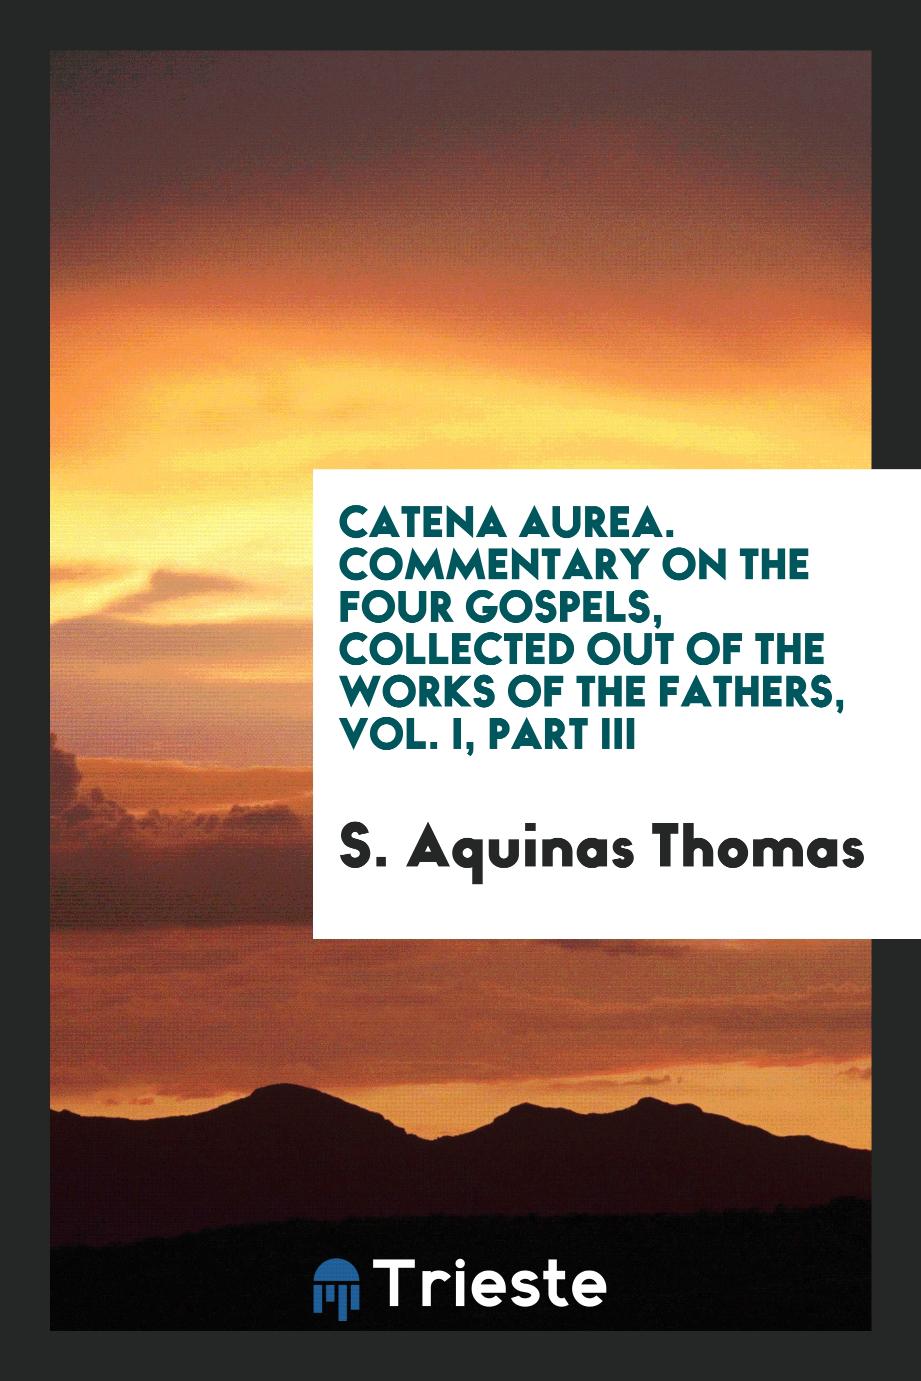 Catena aurea. Commentary on the four Gospels, collected out of the works of the Fathers, Vol. I, Part III